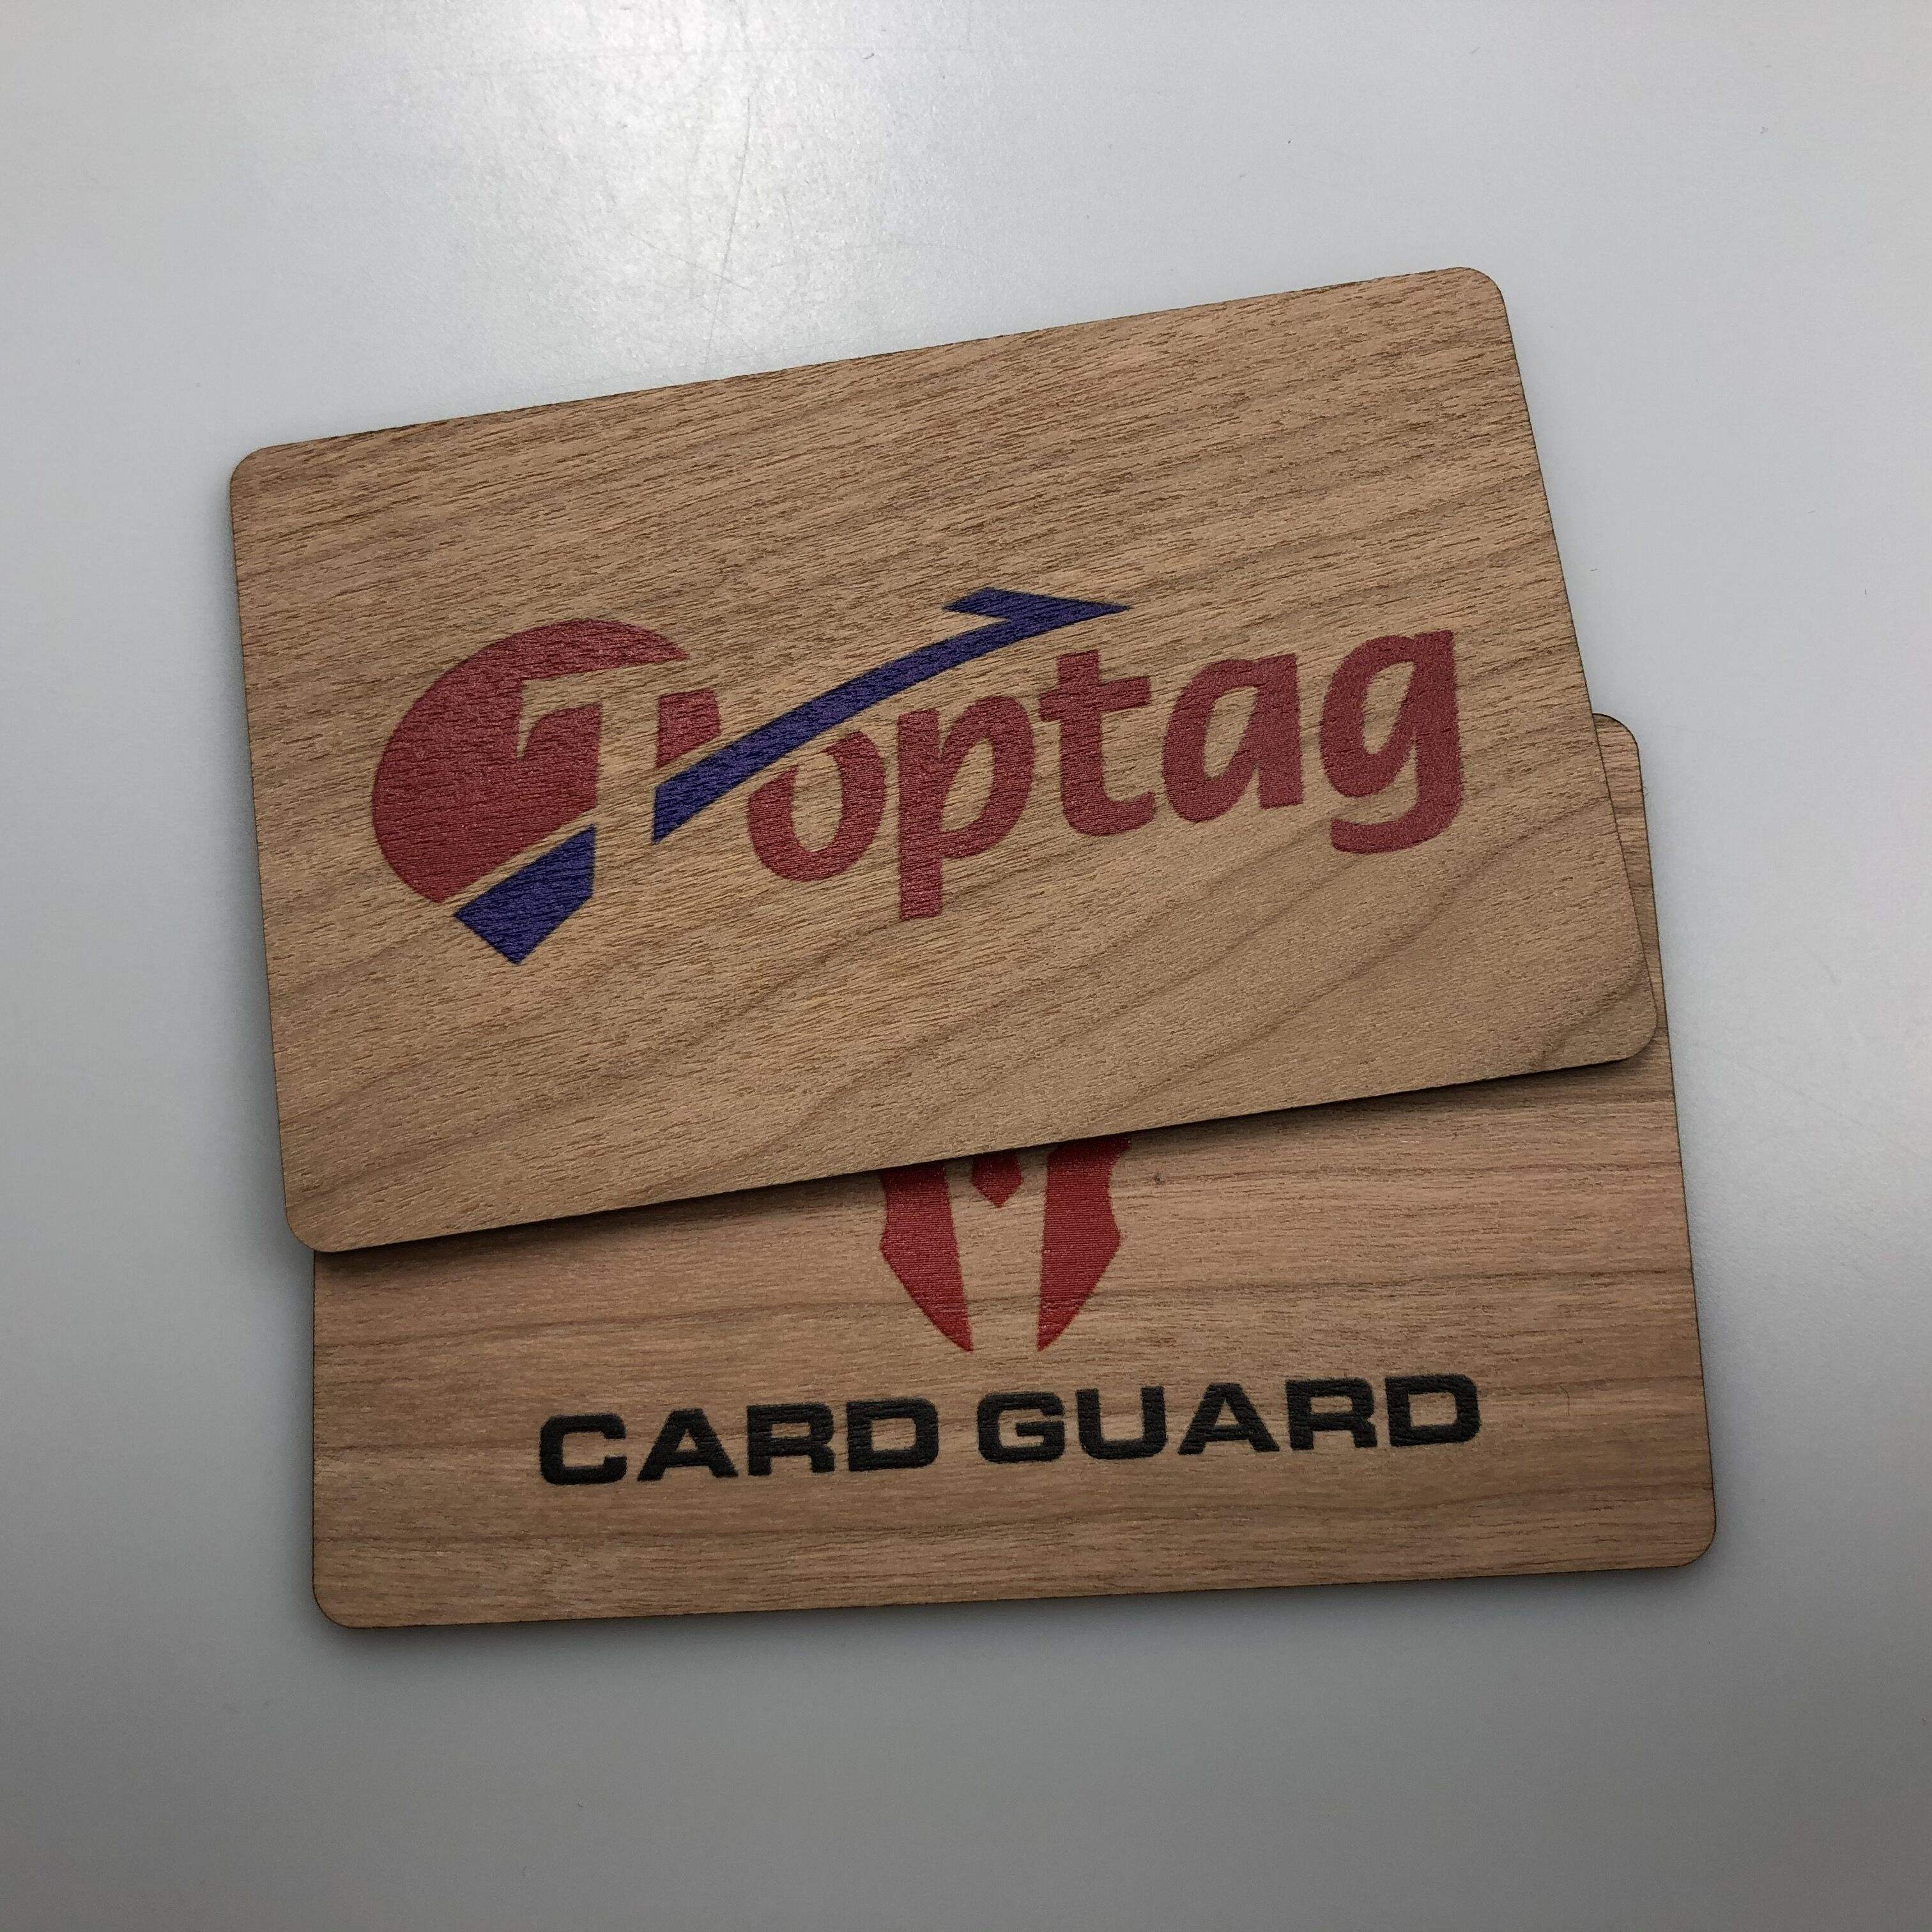 Special various wooden material RFID Card 125Khz 13.56MHz 1.6mm handmade Bamboo Smart Card